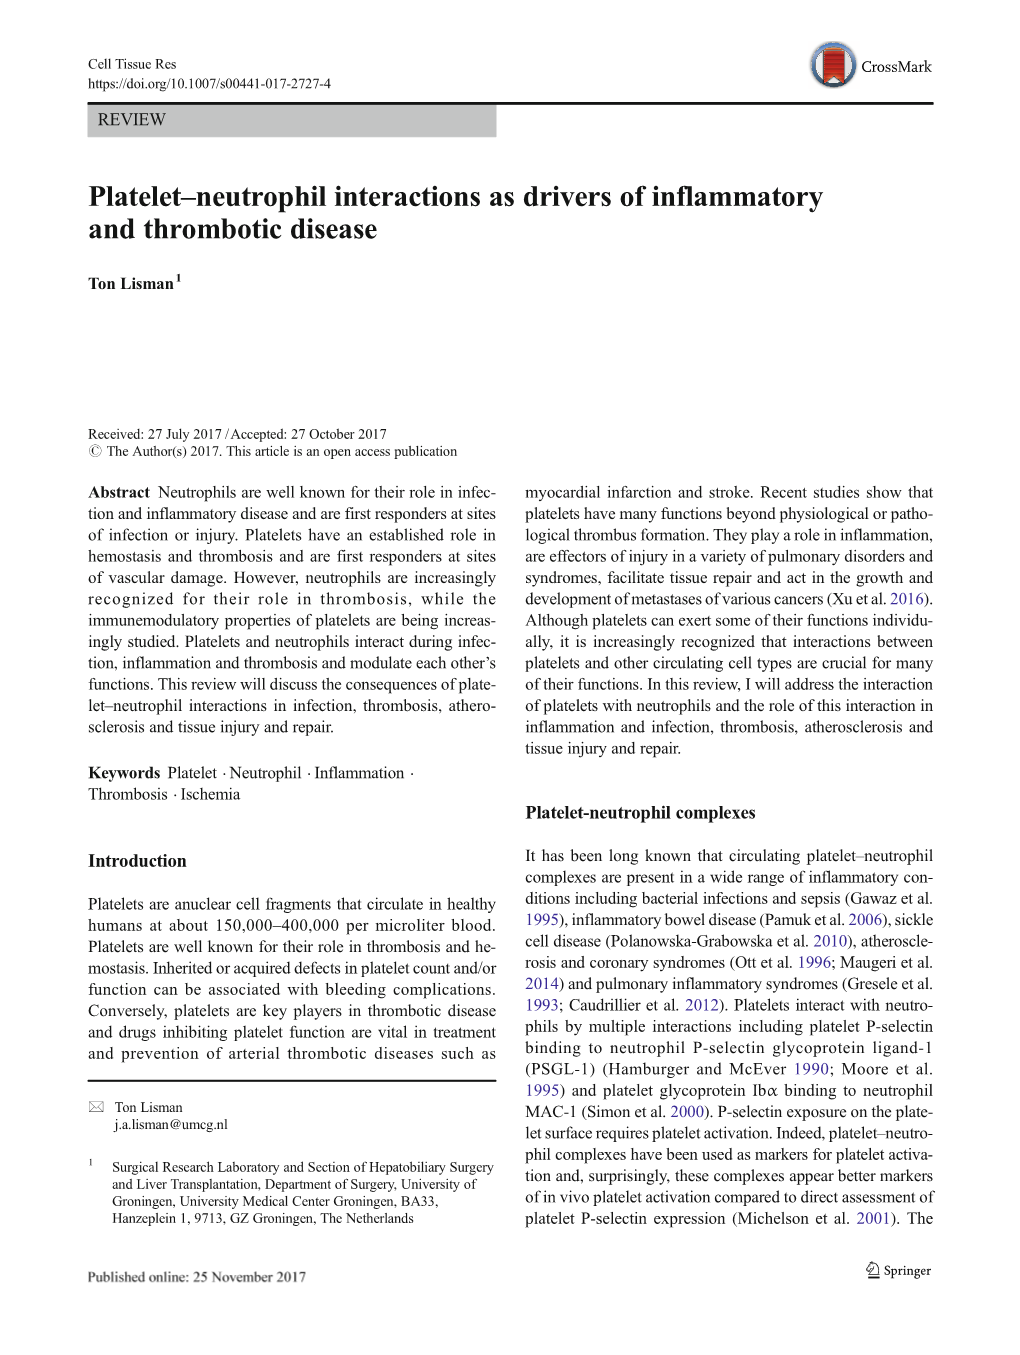 Platelet–Neutrophil Interactions As Drivers of Inflammatory and Thrombotic Disease